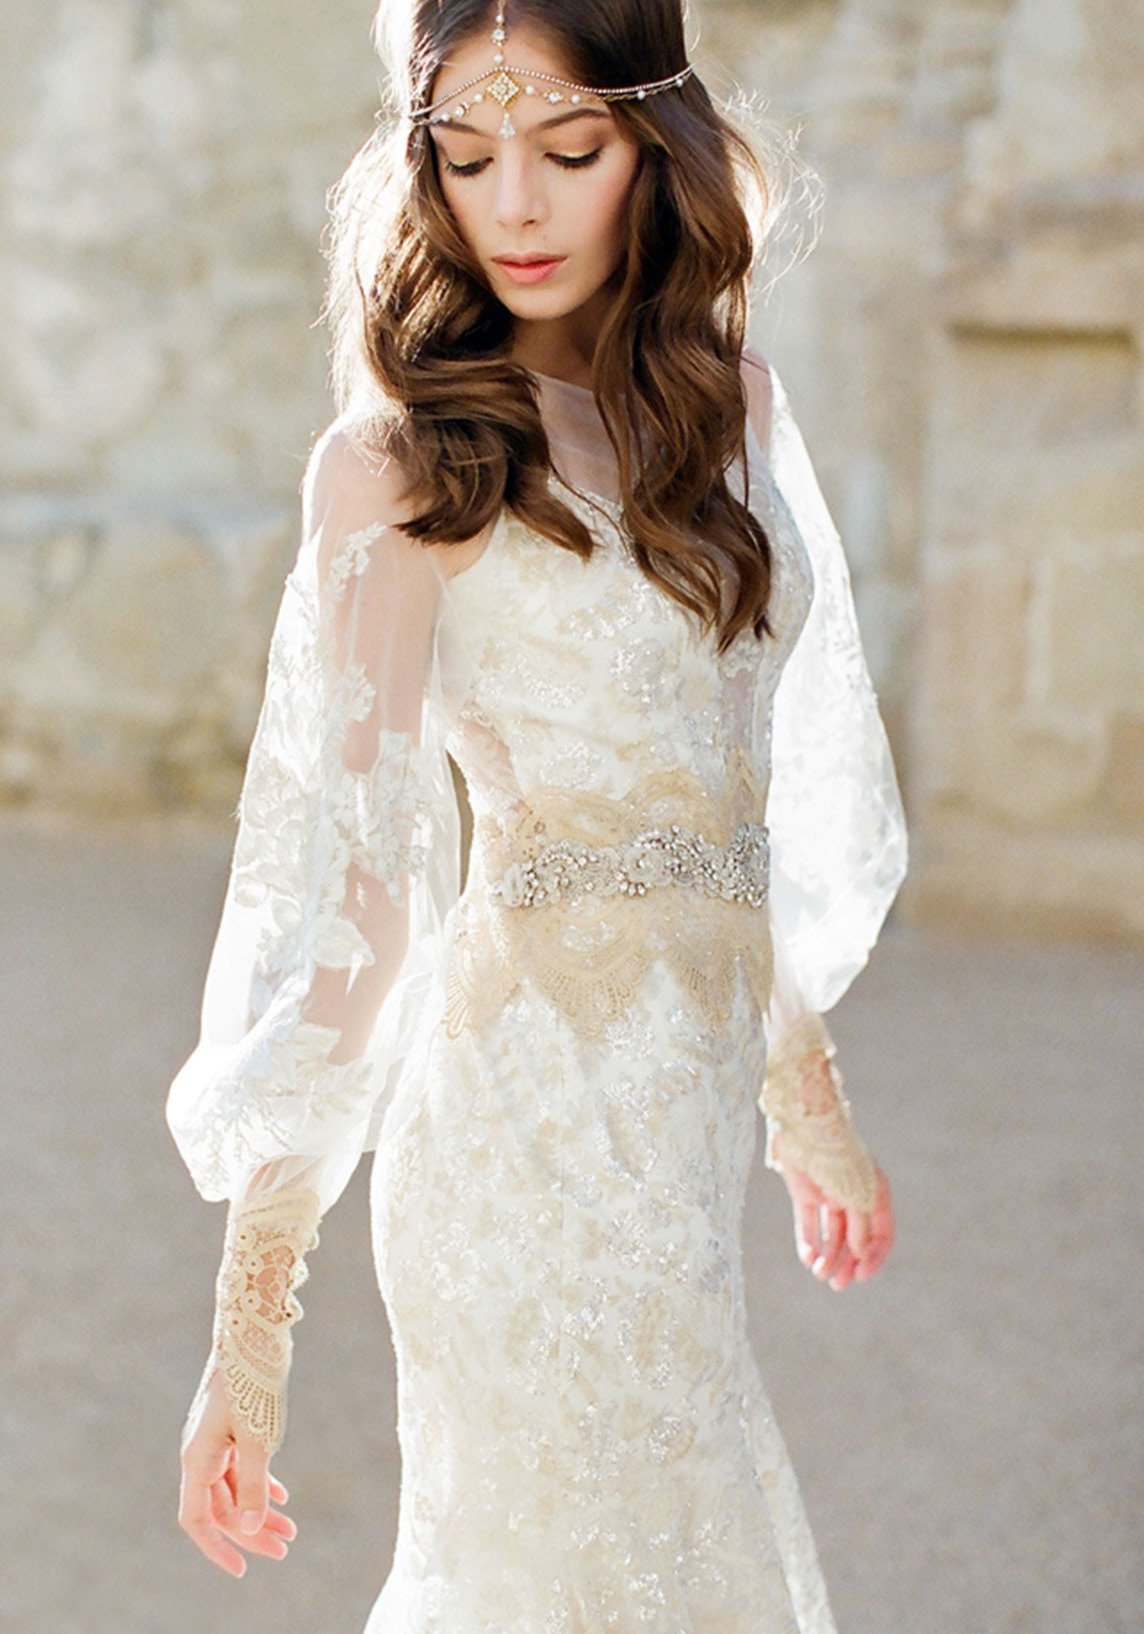 Lace Sequin Wedding Dress  Silver and Gold Wedding Dress